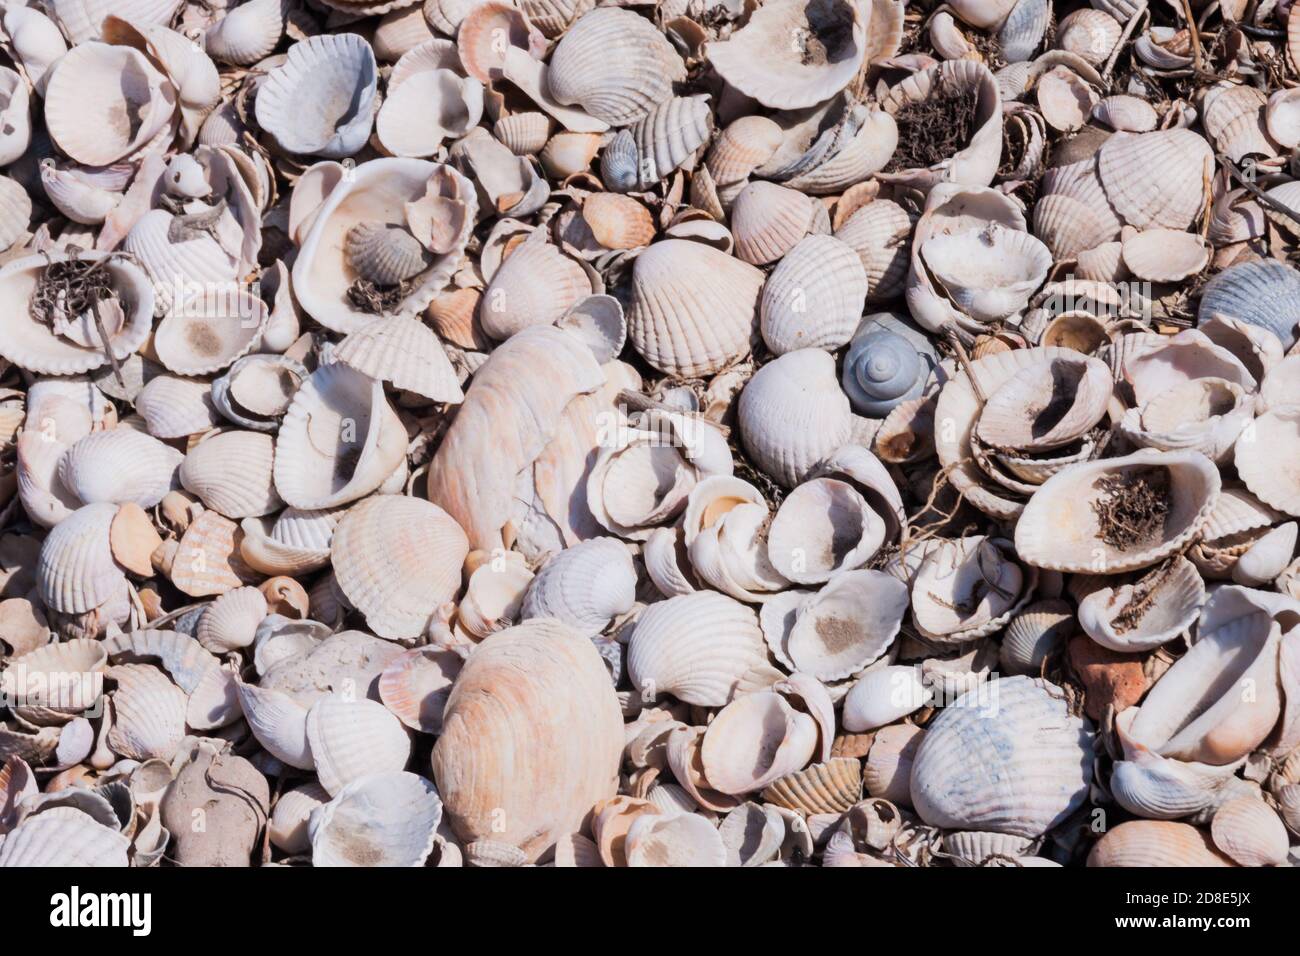 Shell, marine clam (mollusk). Eco-friendly natural sources of calcium.Small sea shells. a scattering of light shells. eco background. Protection of the seas and oceans, protection of nature and ecology. Stock Photo